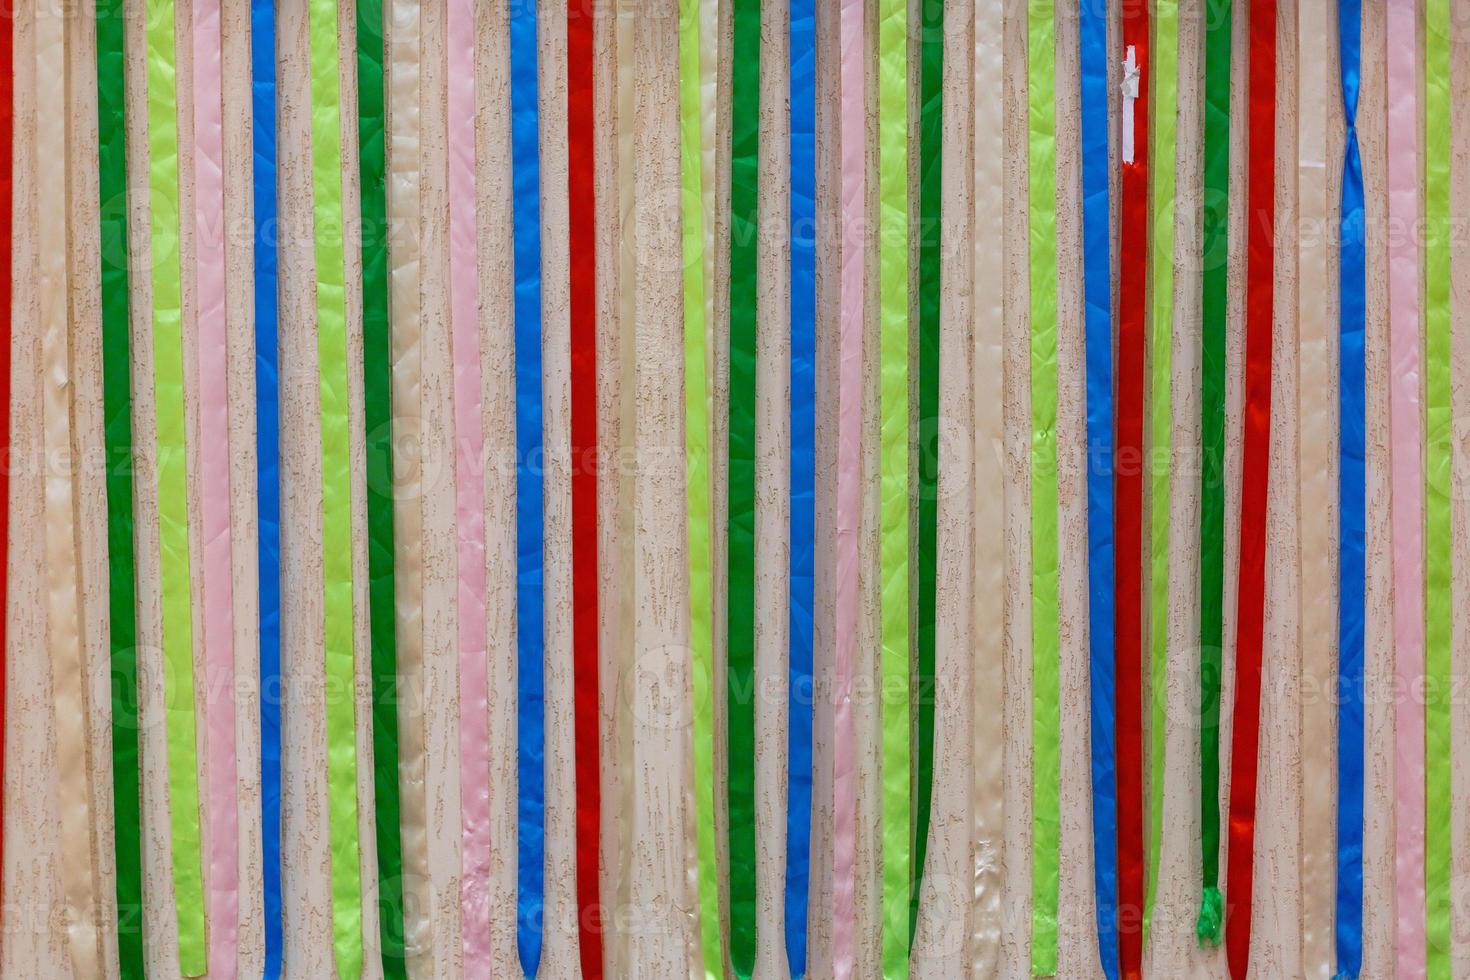 Colorful fabric ribbons play of red blue pink and other colors abstract pattern or texture photo